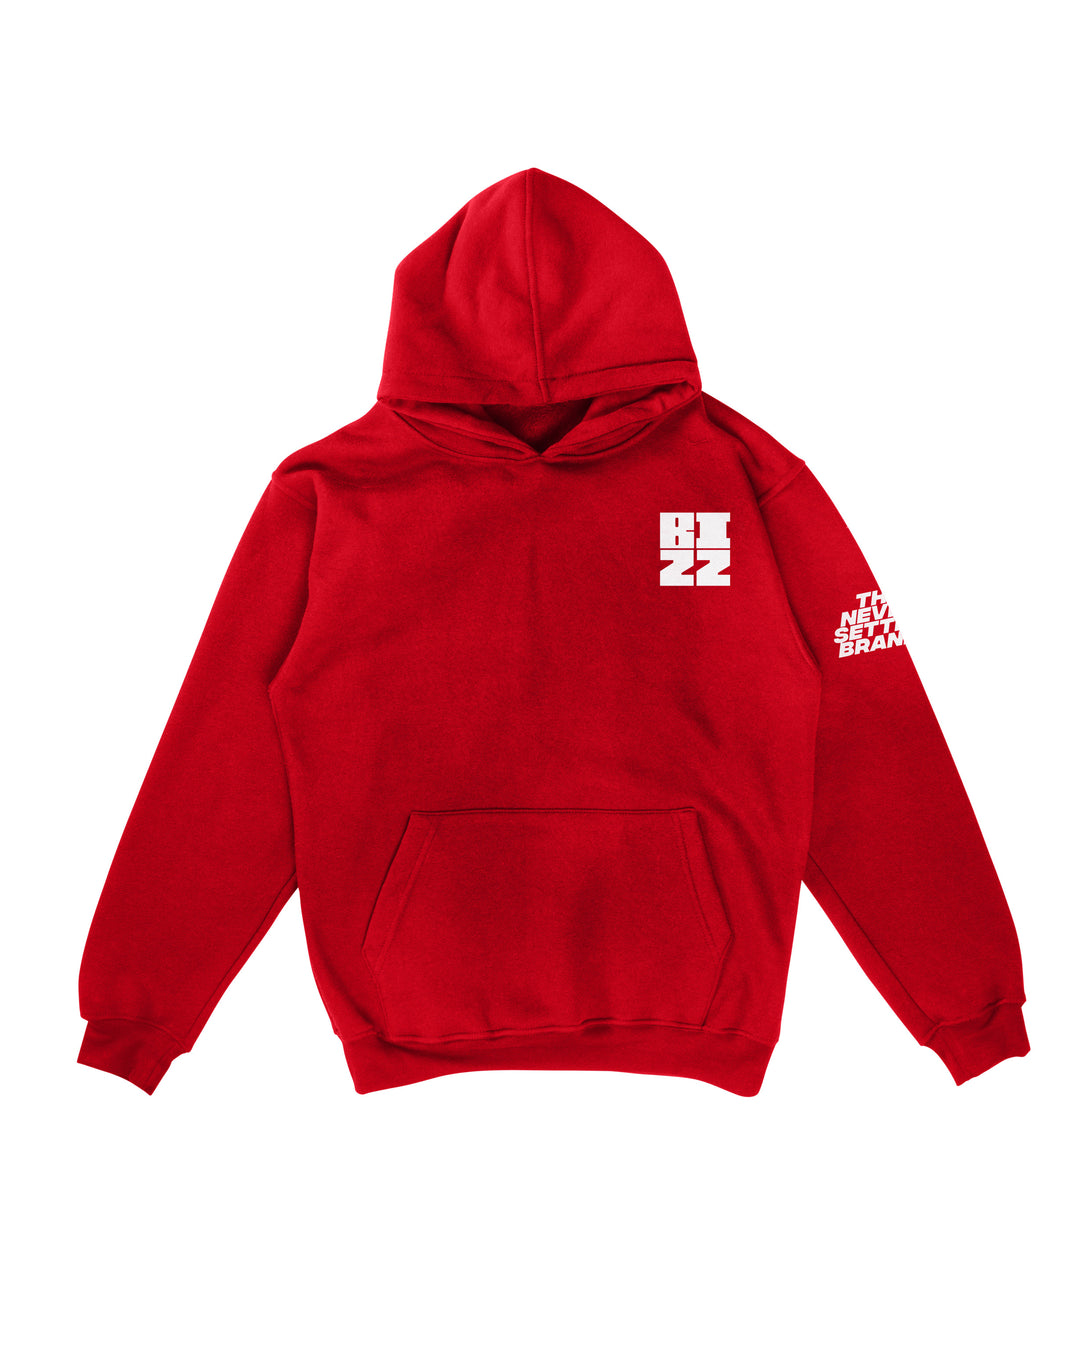 Bizz Hoodie in Red/White